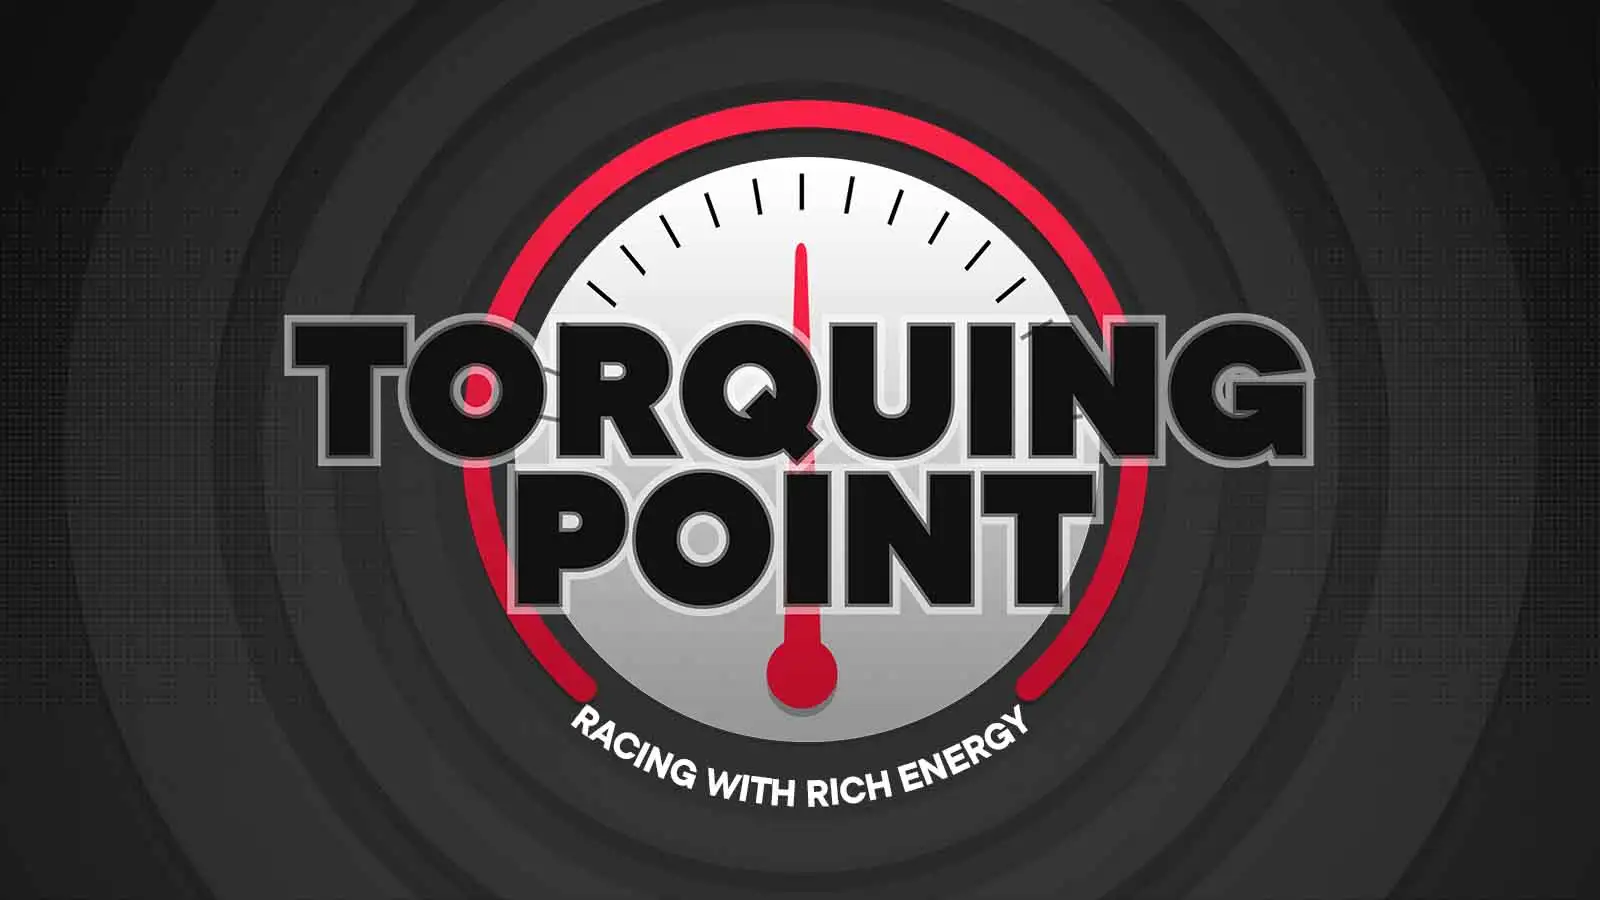 Torquing Point: Racing with Rich Energy. October 2022.